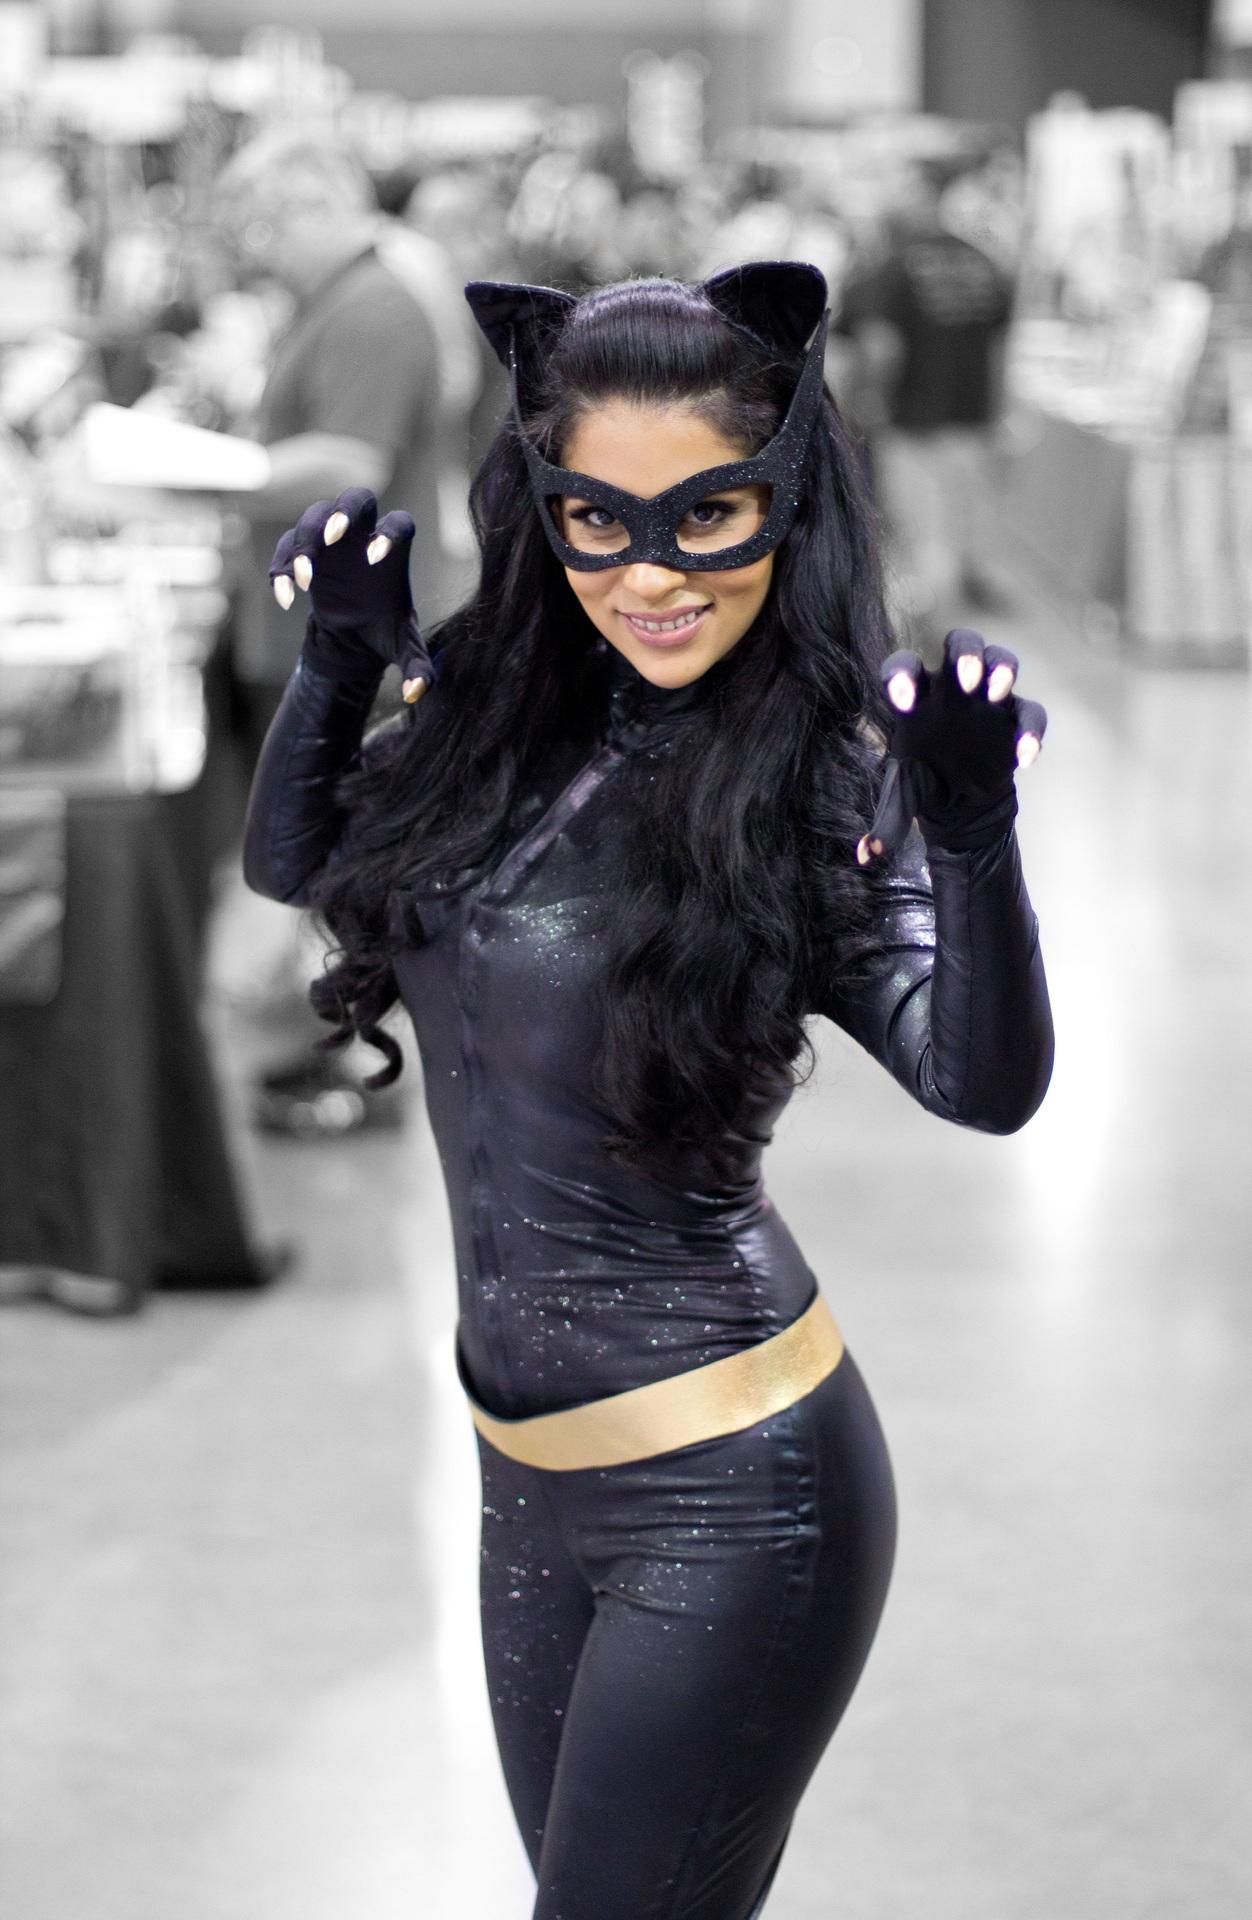 60+ Hot Pictures Of Catwoman From DC Comics 5